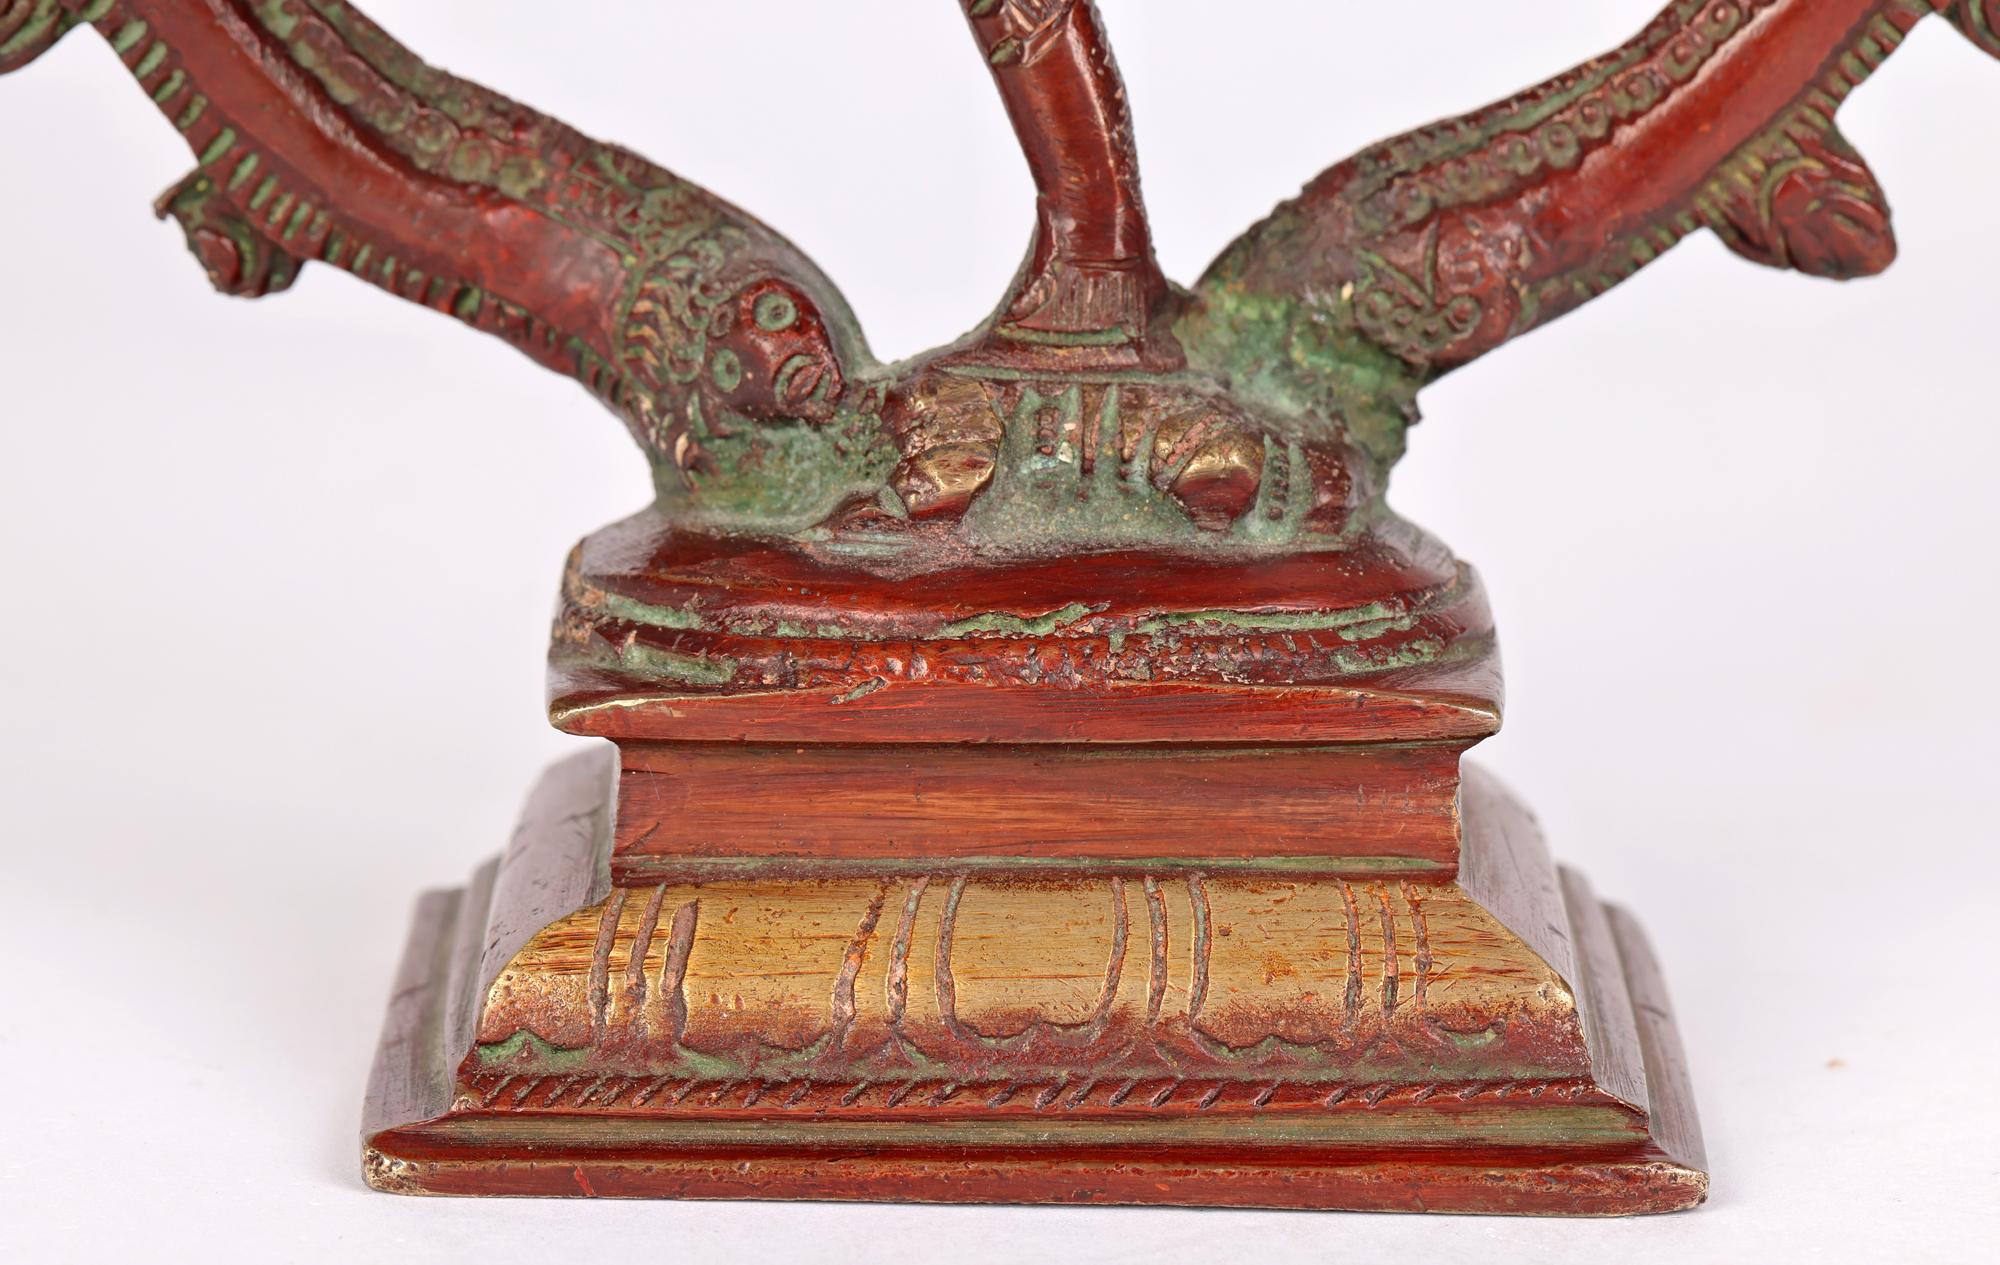 A fine and unusual vintage Asian Indian red lacquered bronze statue of Shiva Nataraja dating from the 20th century. The figure represents the Hindu God Shiva performing a dance. The figure is mounted on a rectangular pedestal base and stands on top